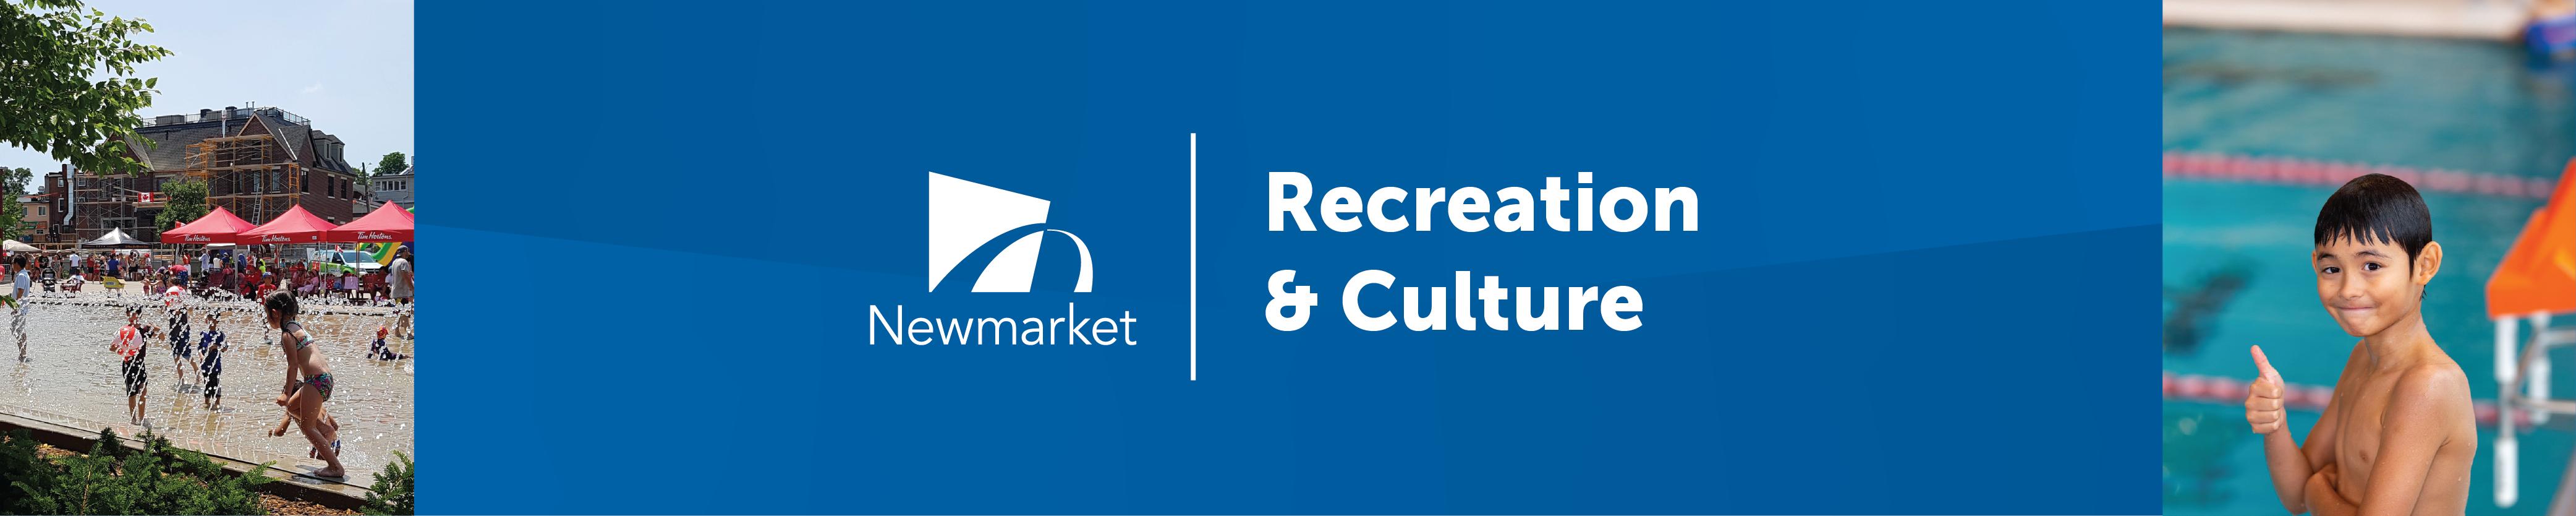 recreation and culture banner